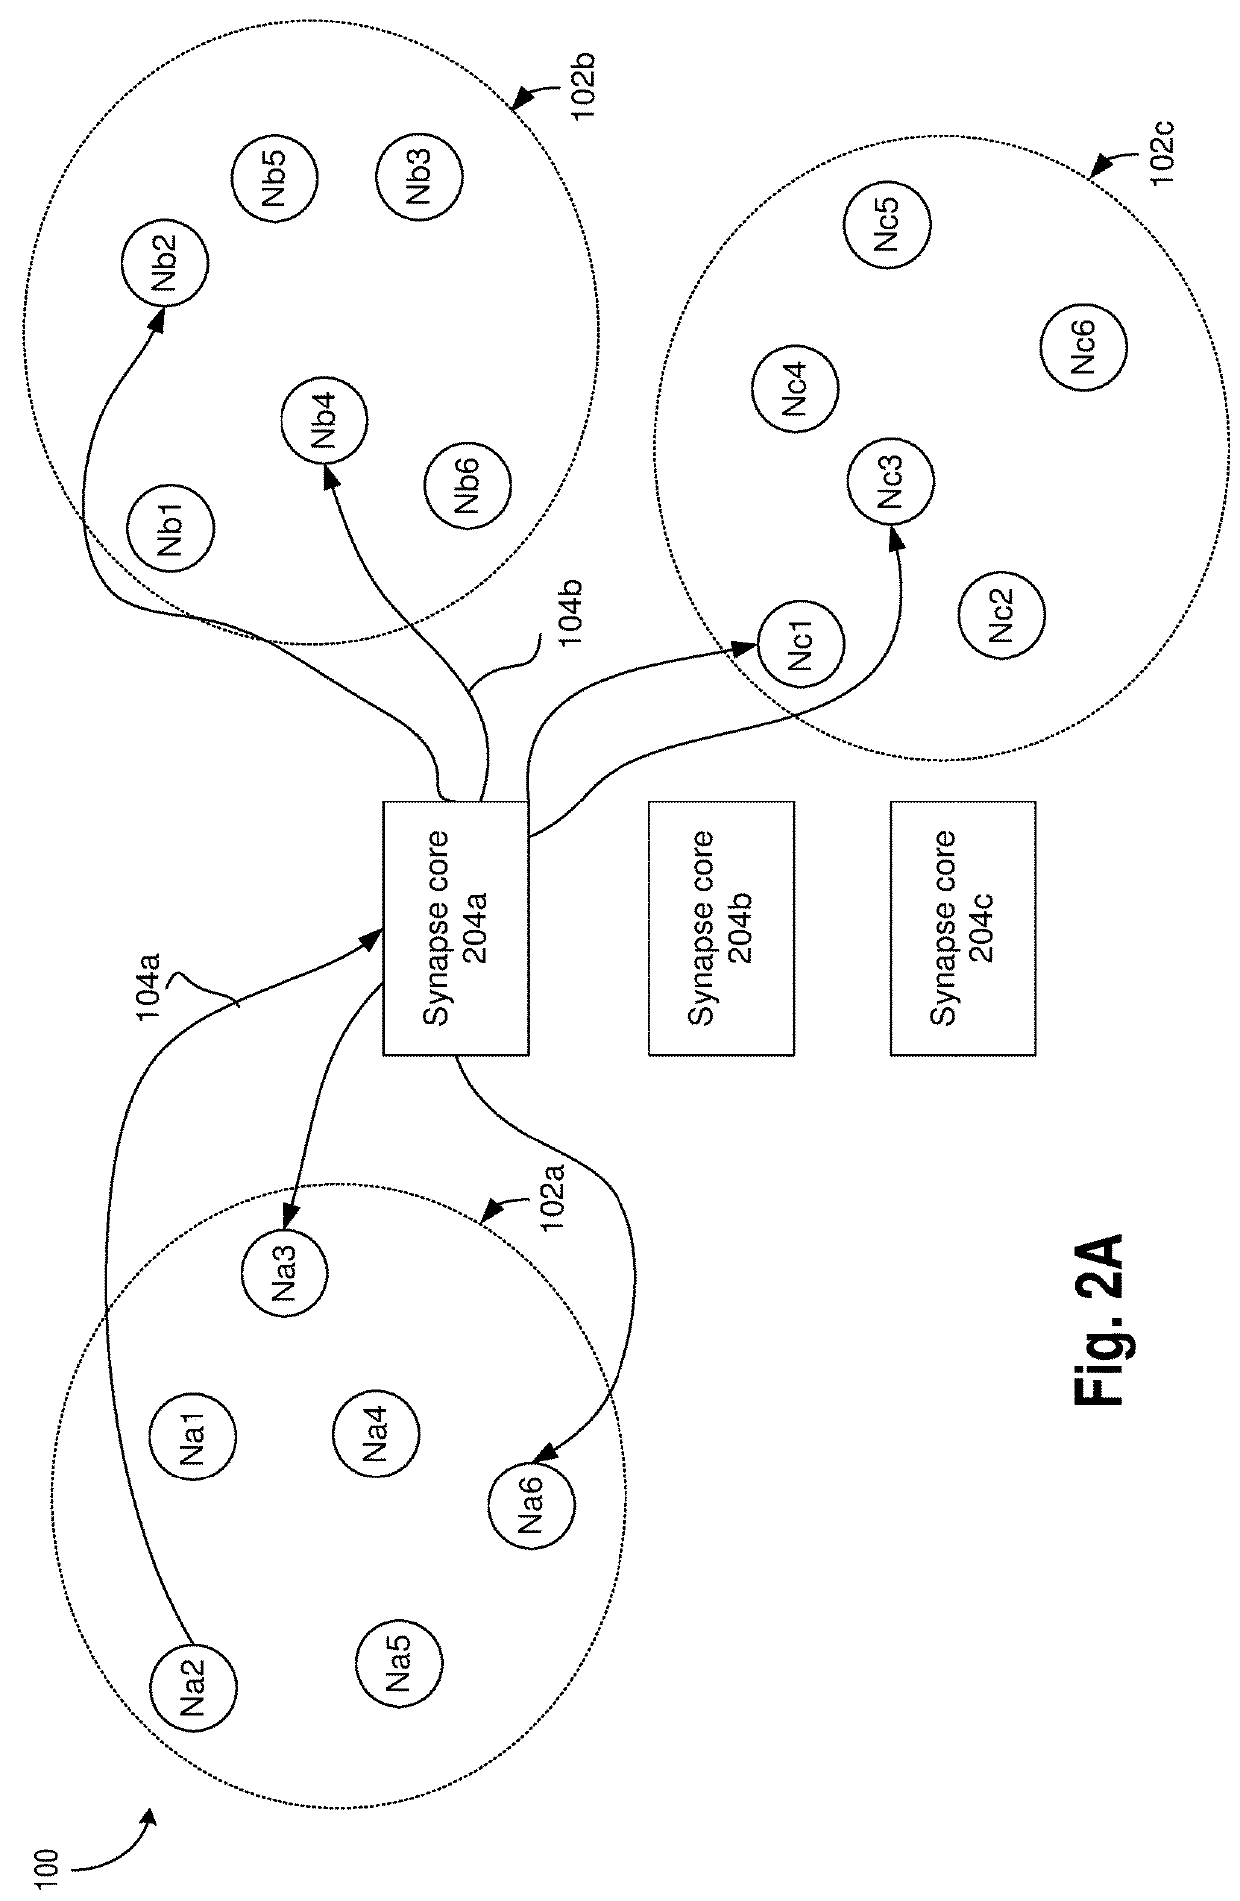 Neuromorphic circuits for storing and generating connectivity information